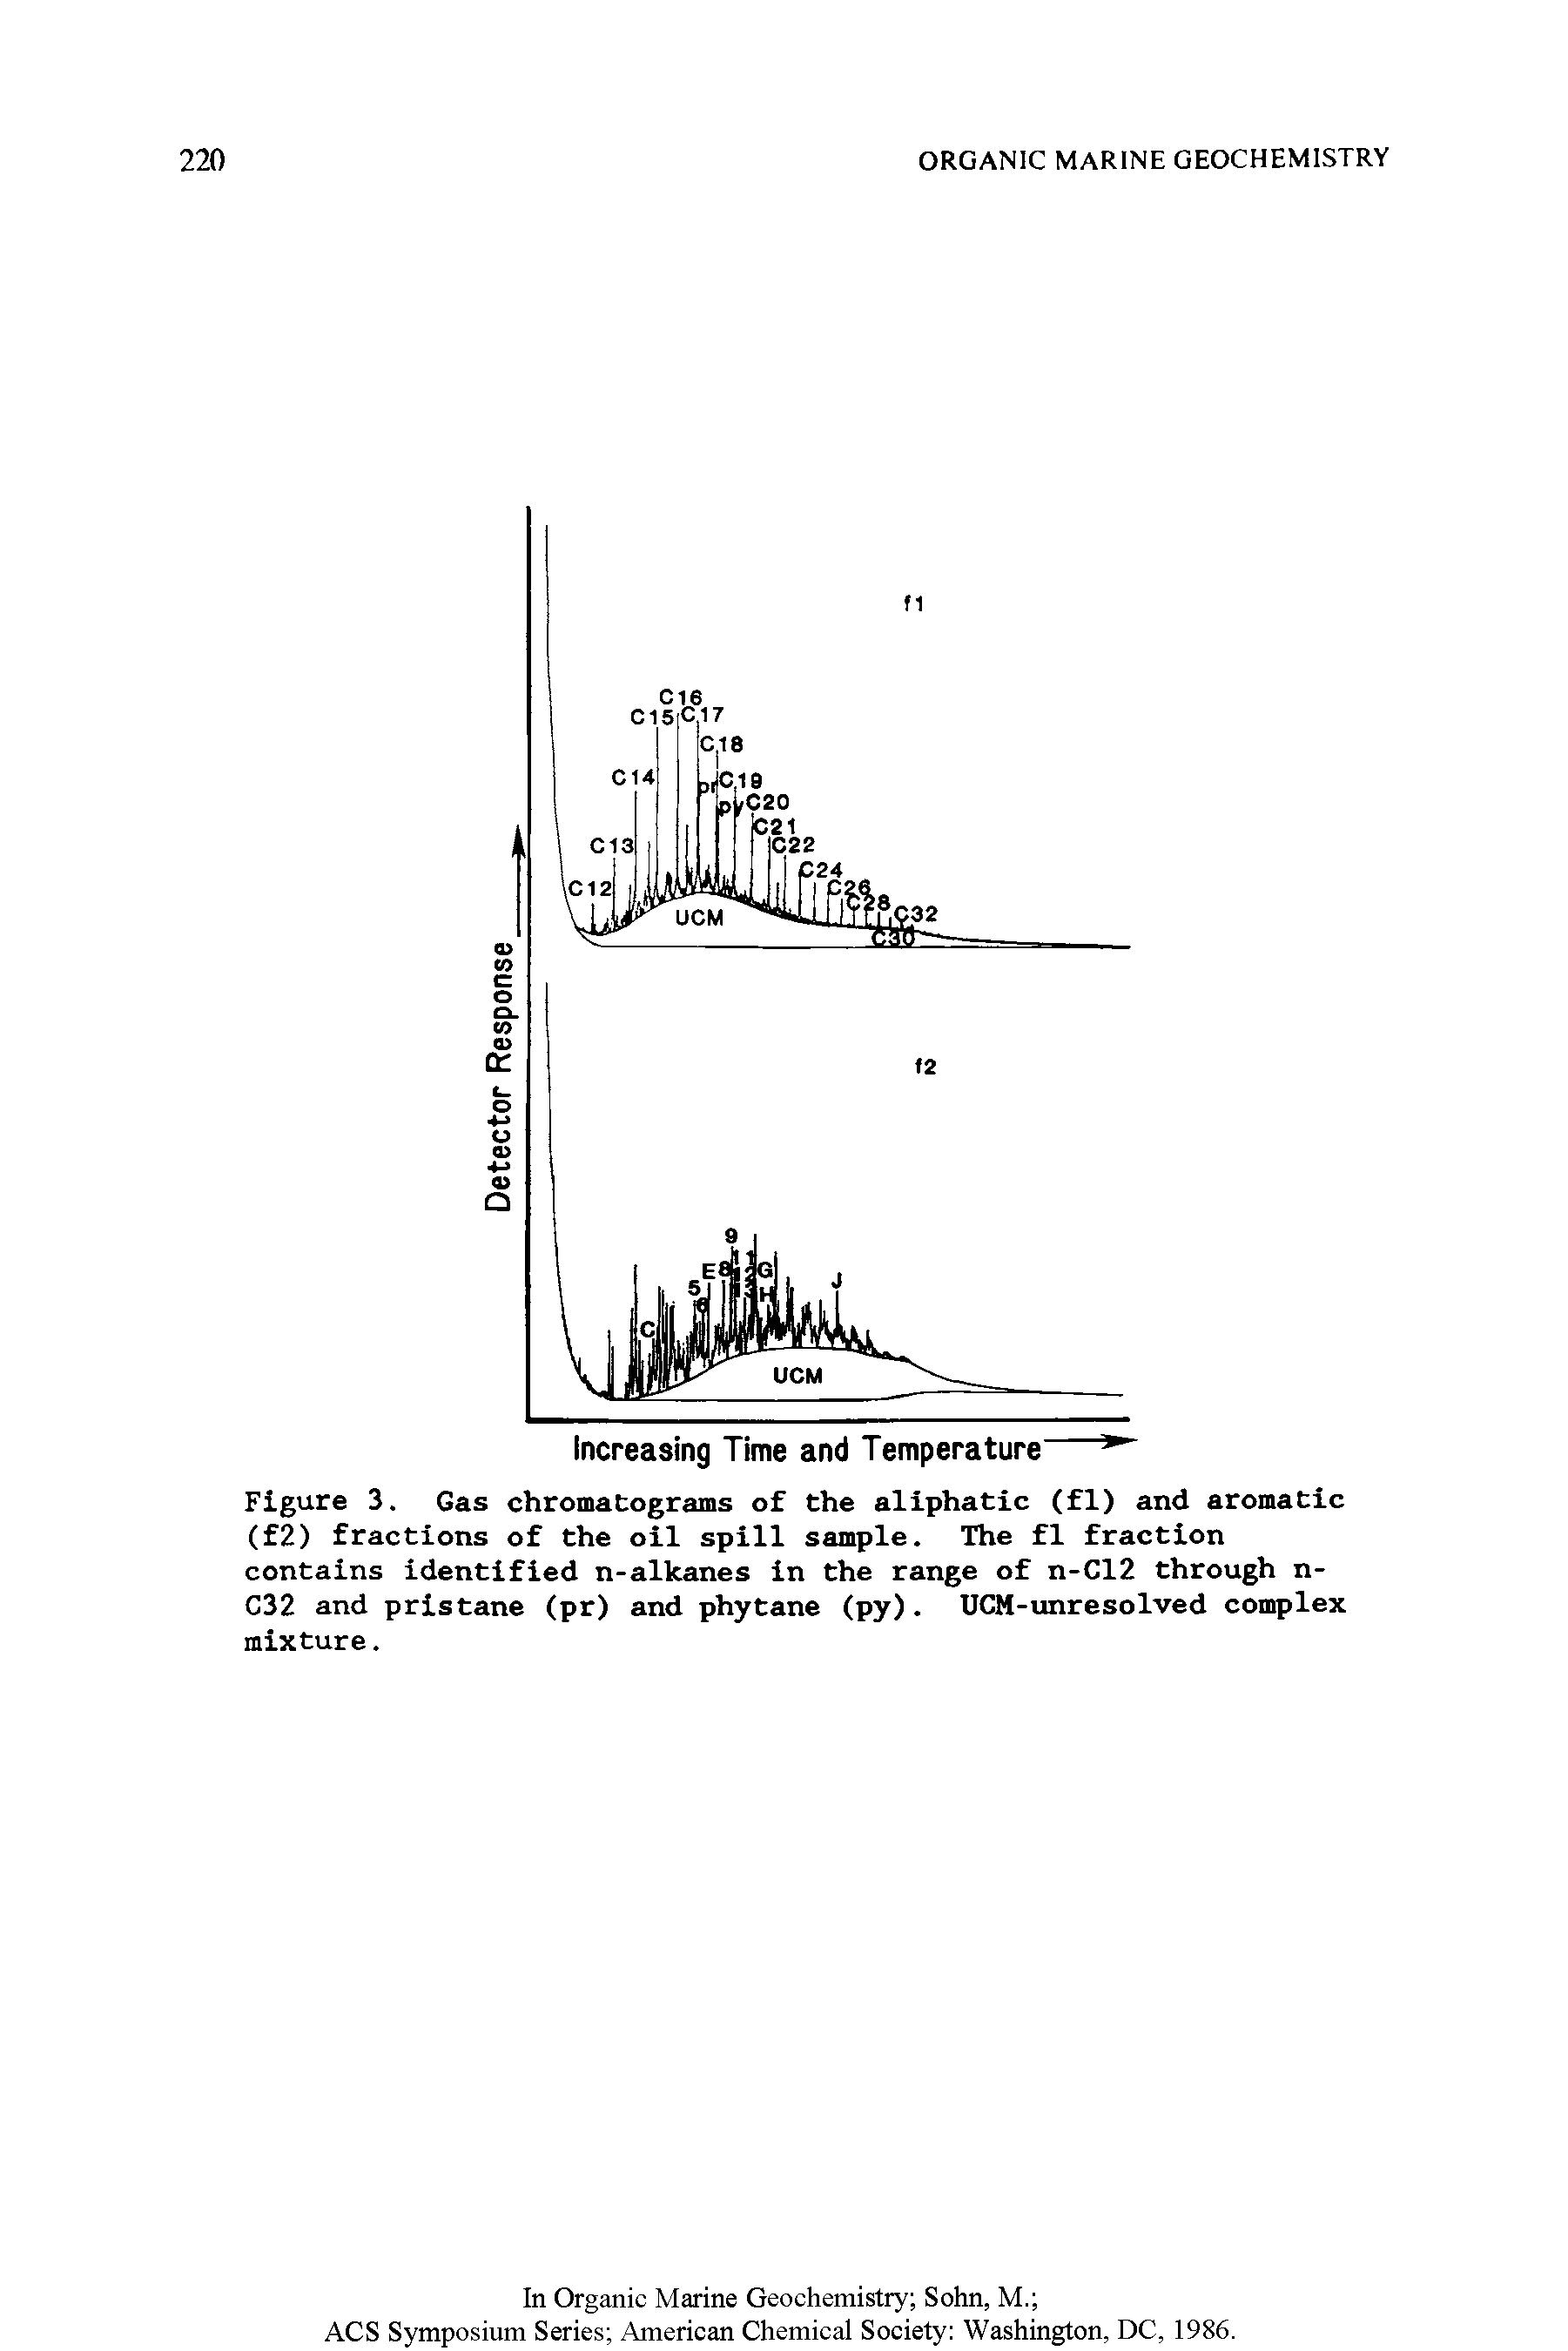 Figure 3. Gas chromatograms of the aliphatic (fl) and aromatic (f2) fractions of the oil spill sample. The fl fraction contains identified n-alkanes in the range of n-C12 through n-C32 and pristane (pr) and phytane (py). UCM-unresolved complex mixture.